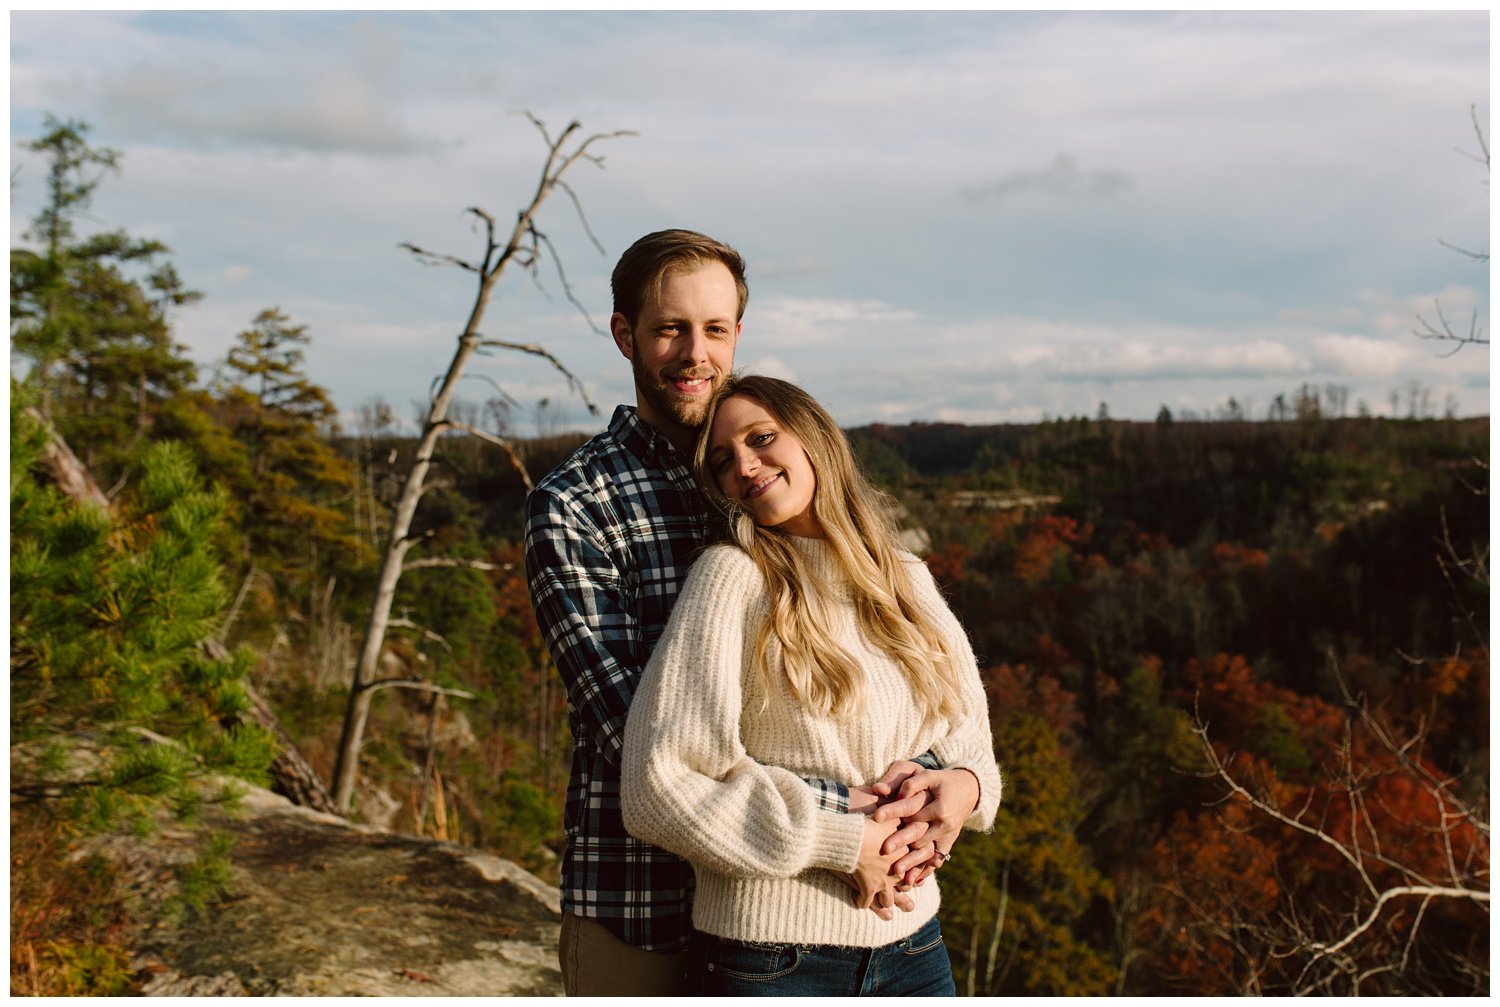 kendra_Farris_photography_red_river_gorge_photographer_proposal_engagement_elopement-76.jpg